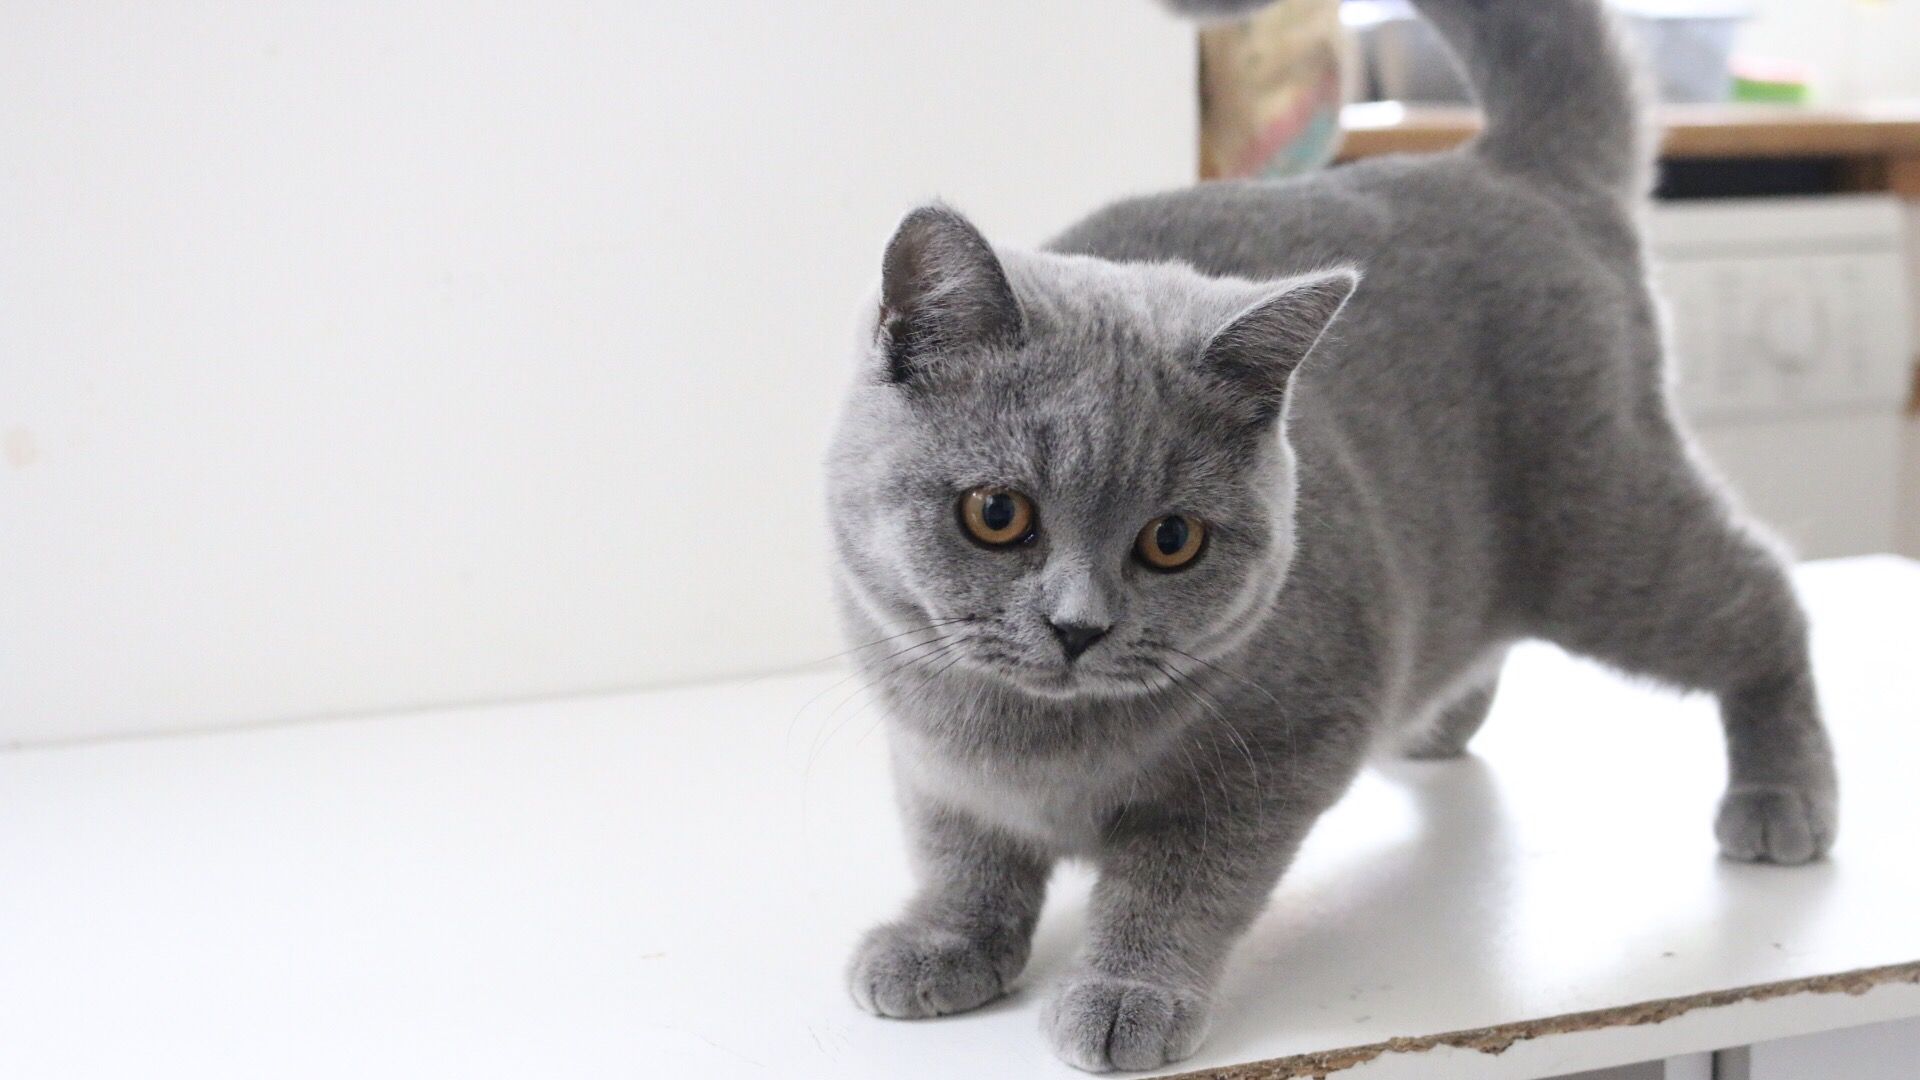  British Shorthair  cats and kittens facts you should know 